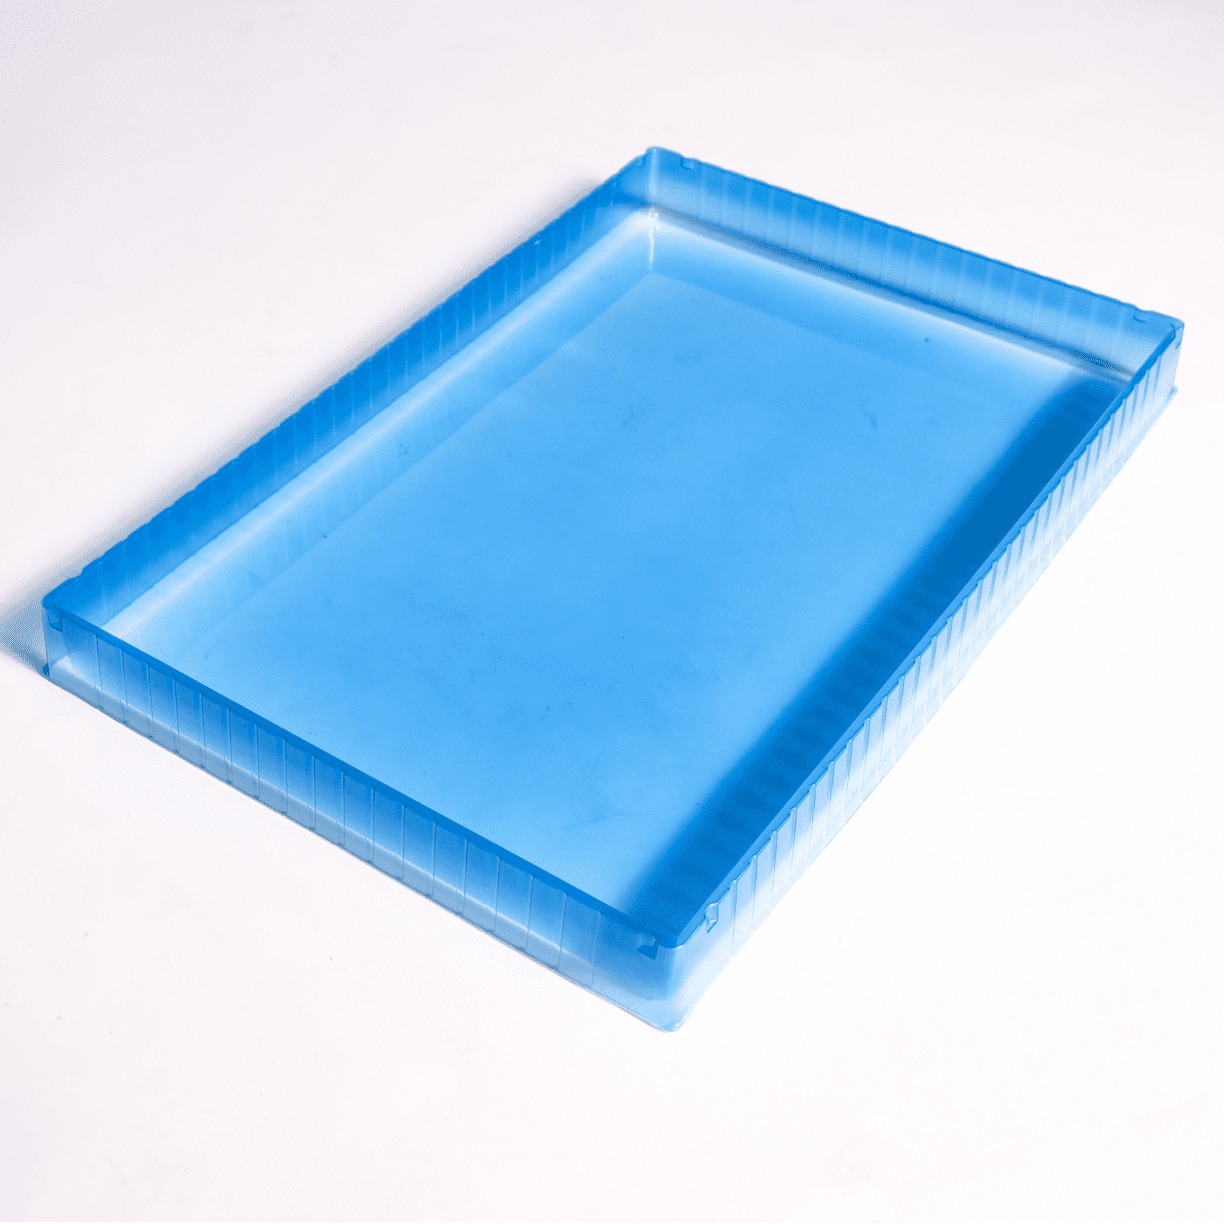 Example of thermoformed cake mold